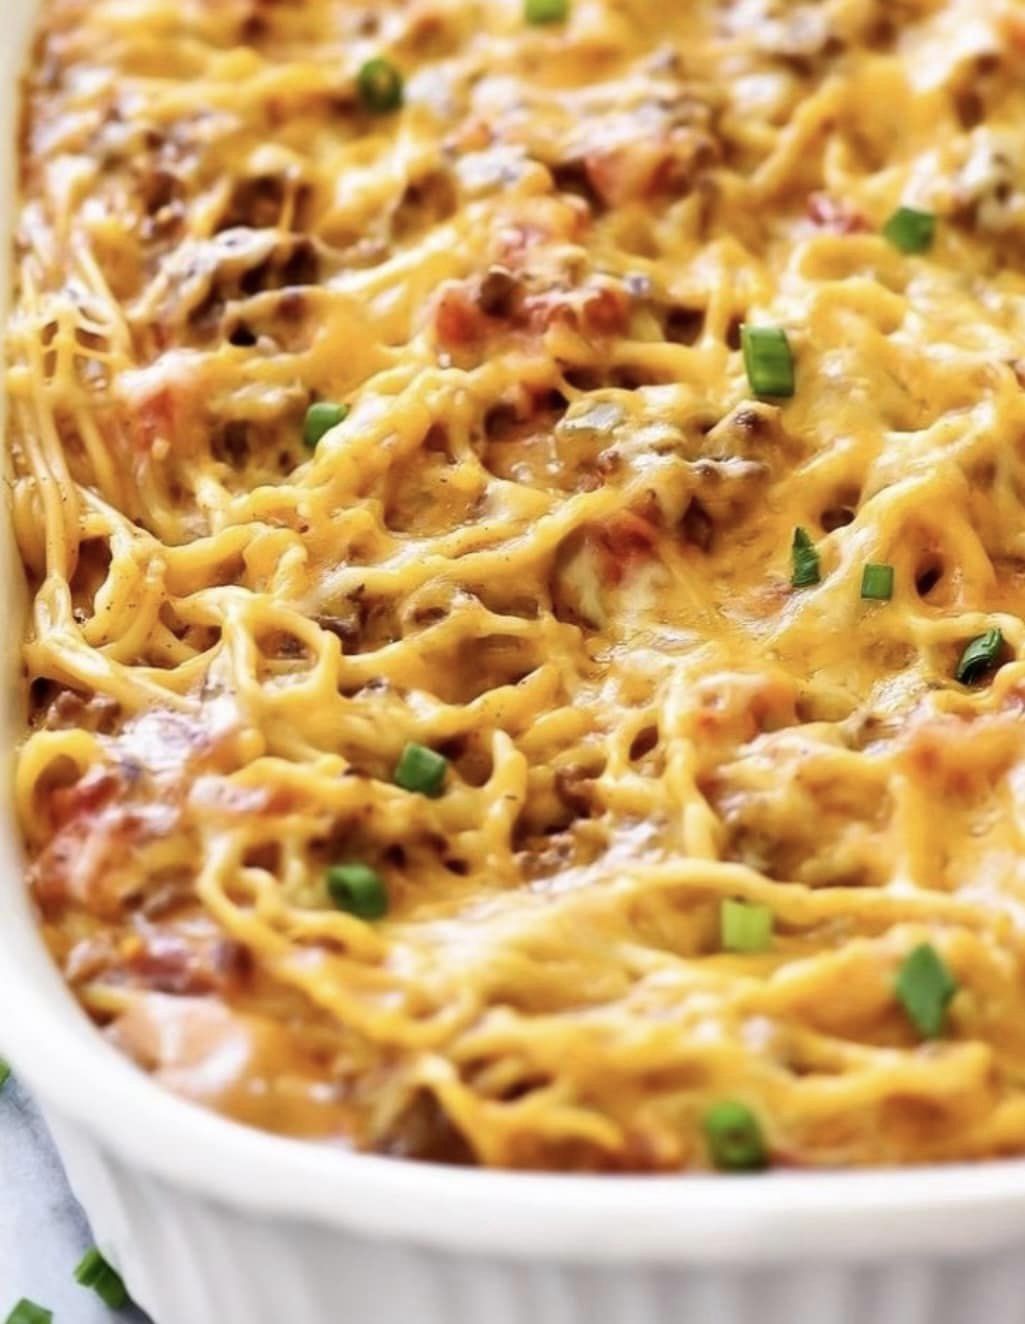 orange cheese and sauce on baked spaghetti noodles in casserole dish